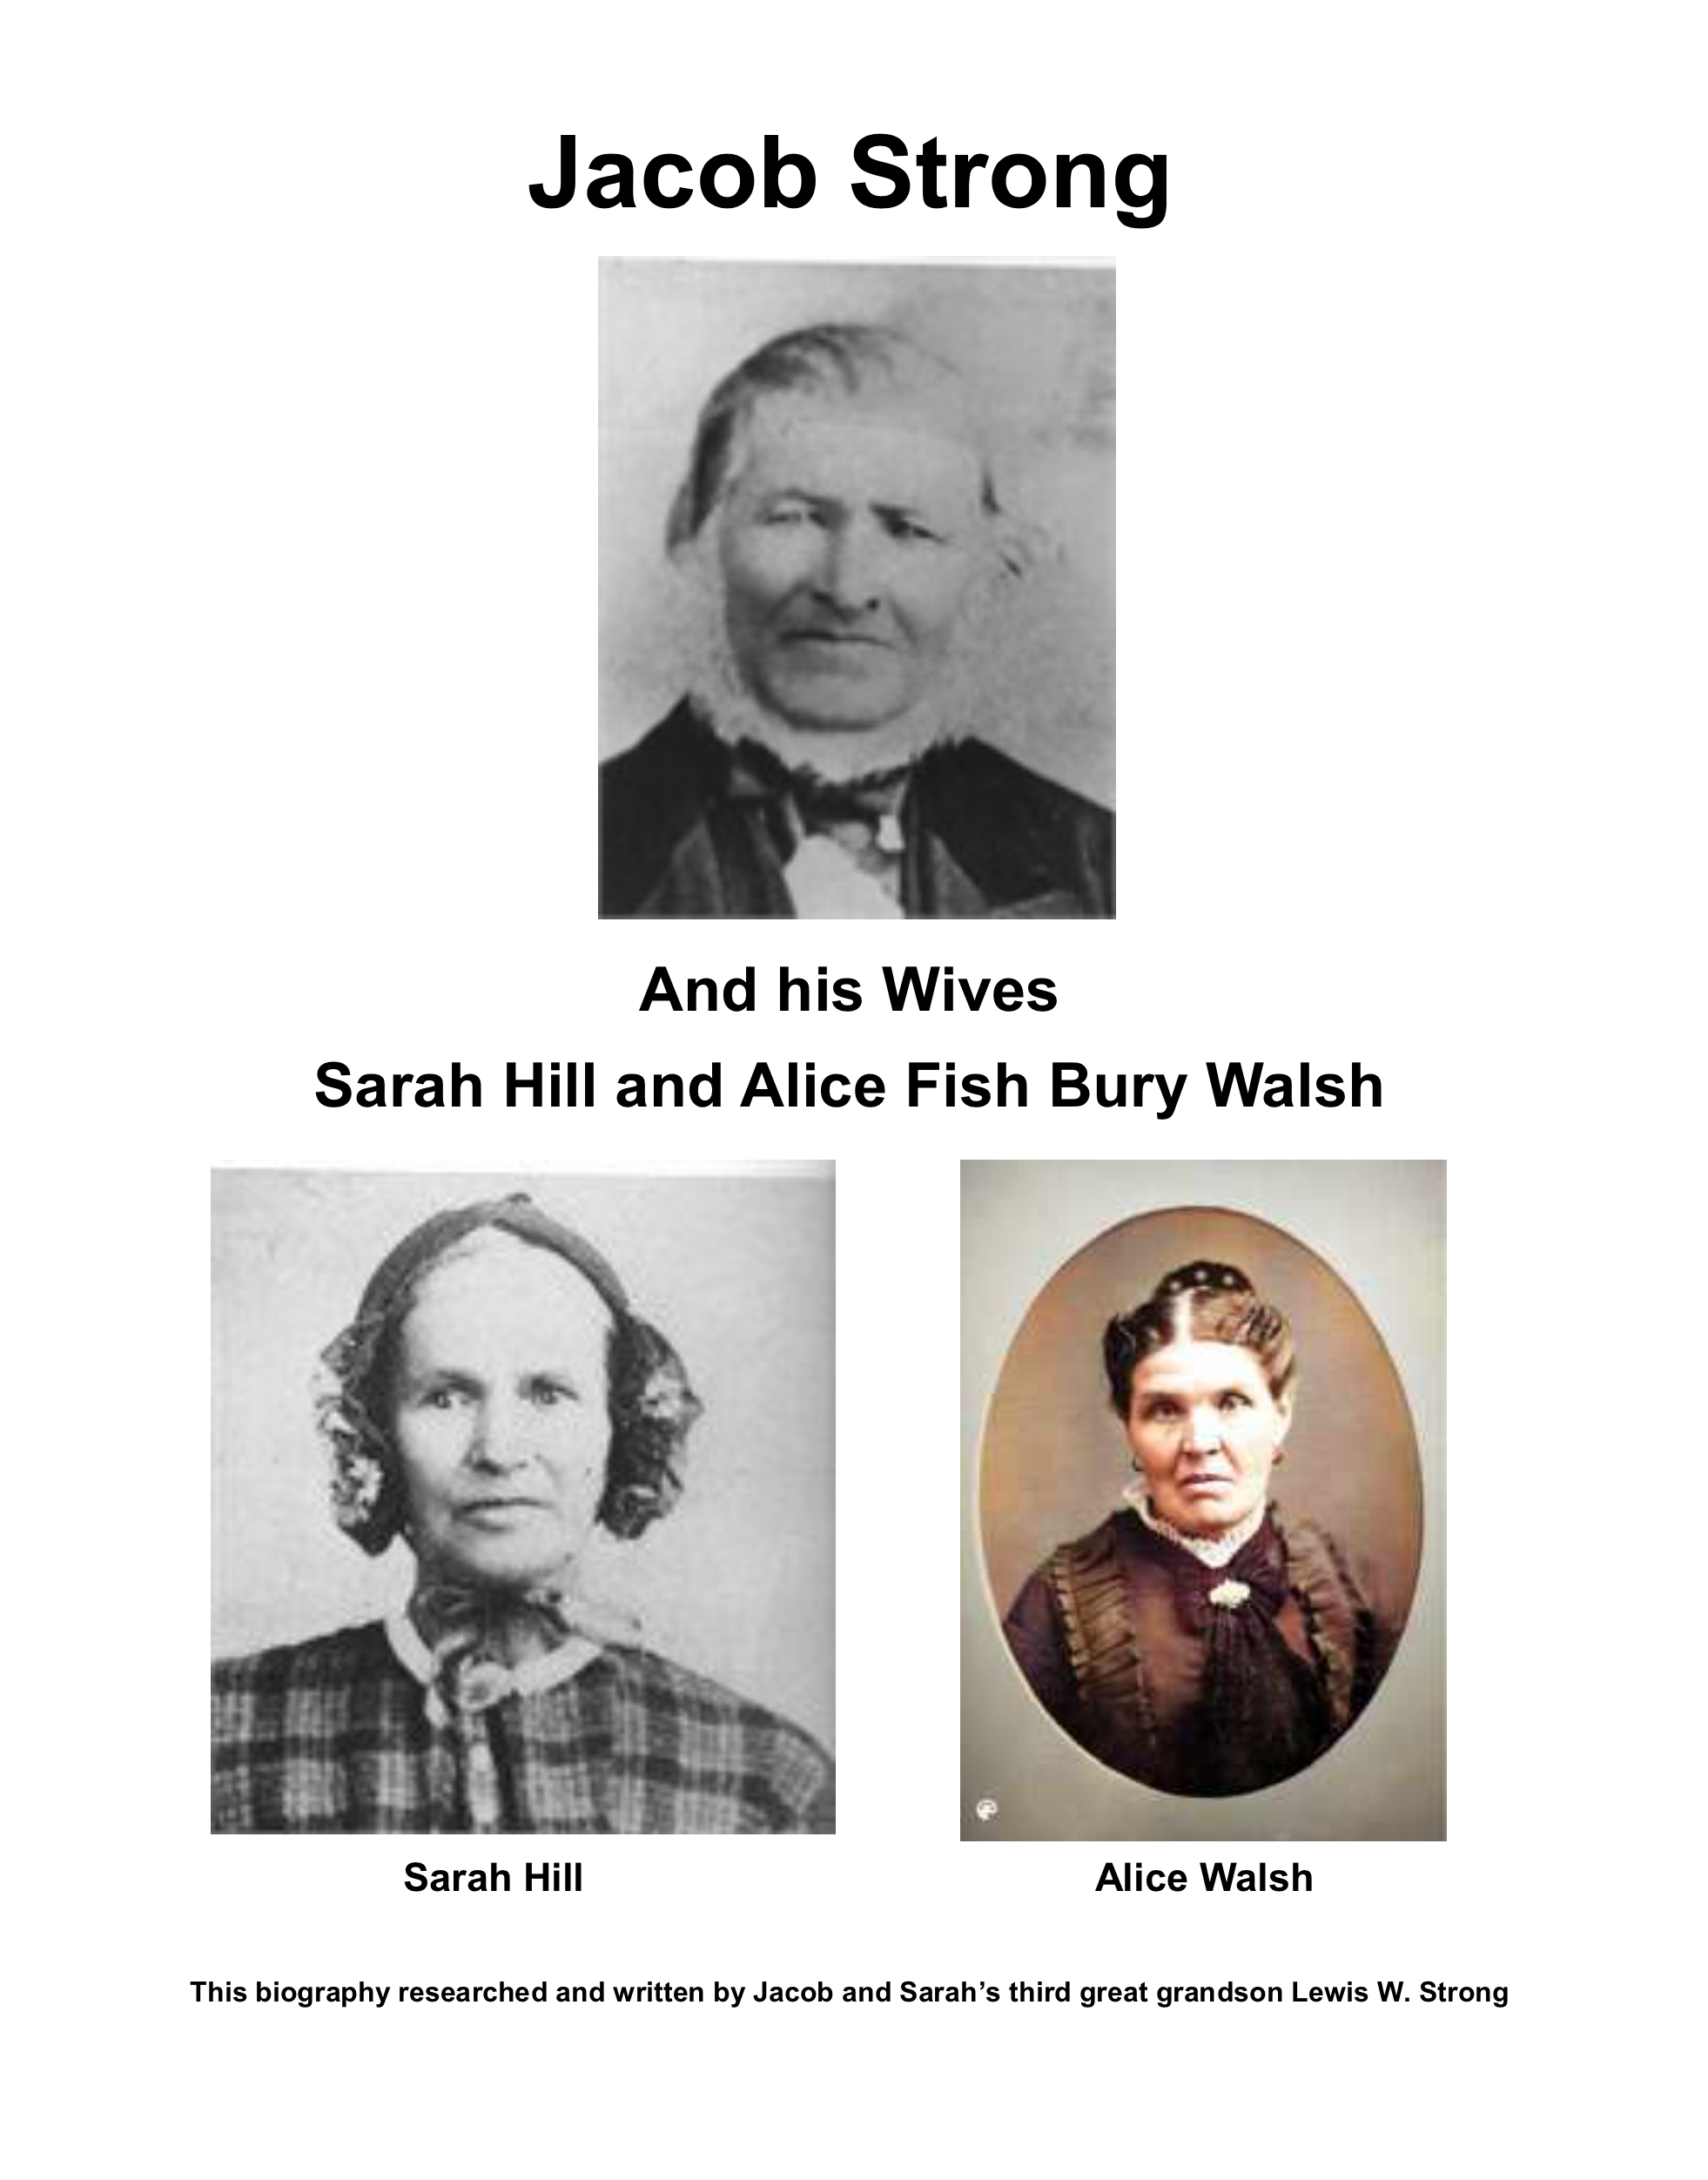 Jacob Strong and His Wives Sarah Hill and Alice Walsh